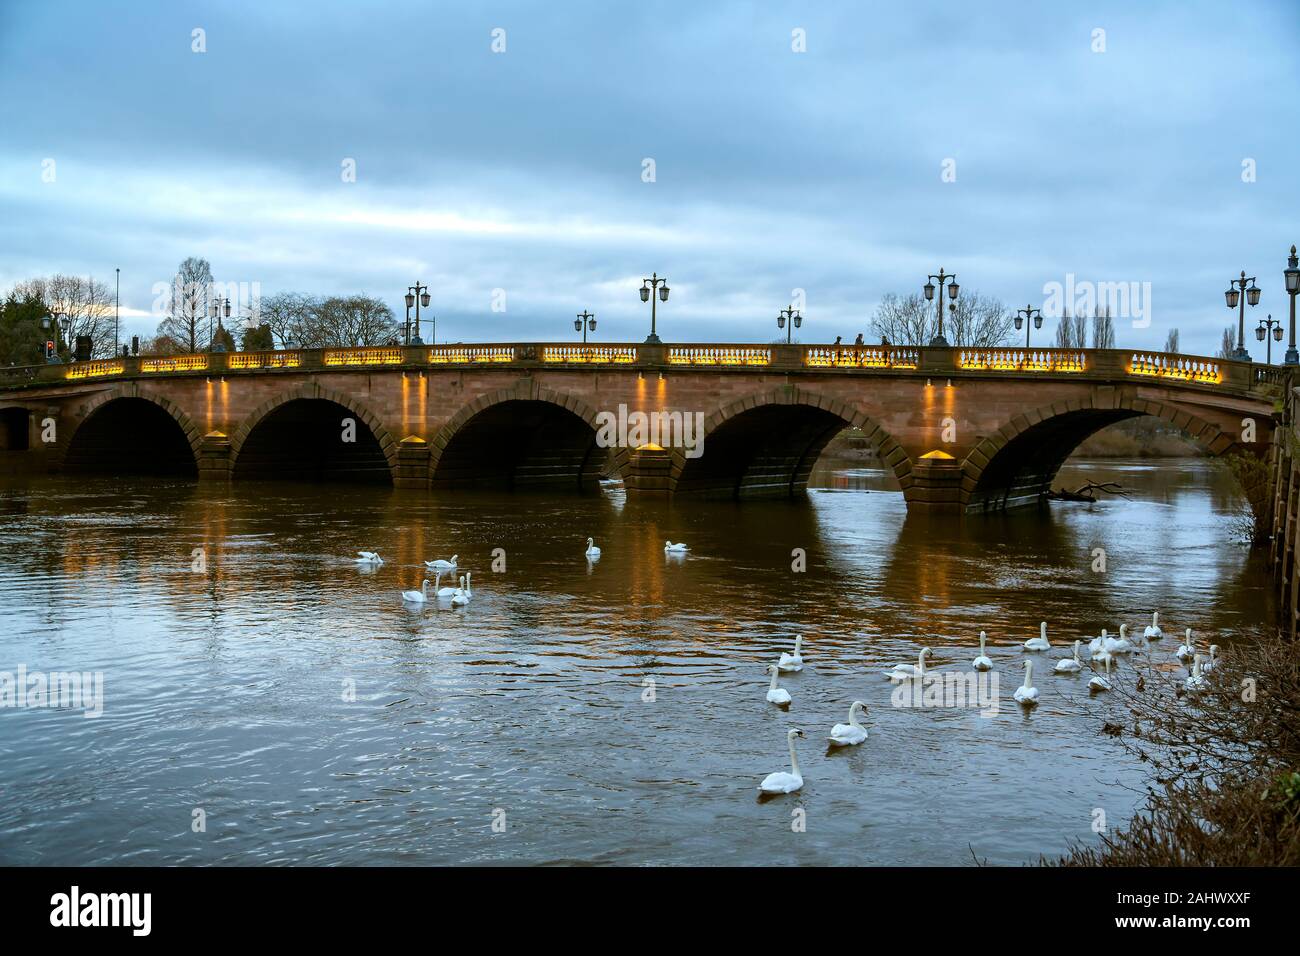 Worcester bridge at dusk. Traditional style lampposts, magnificent arches and swans enjoying the River Severn. Stock Photo